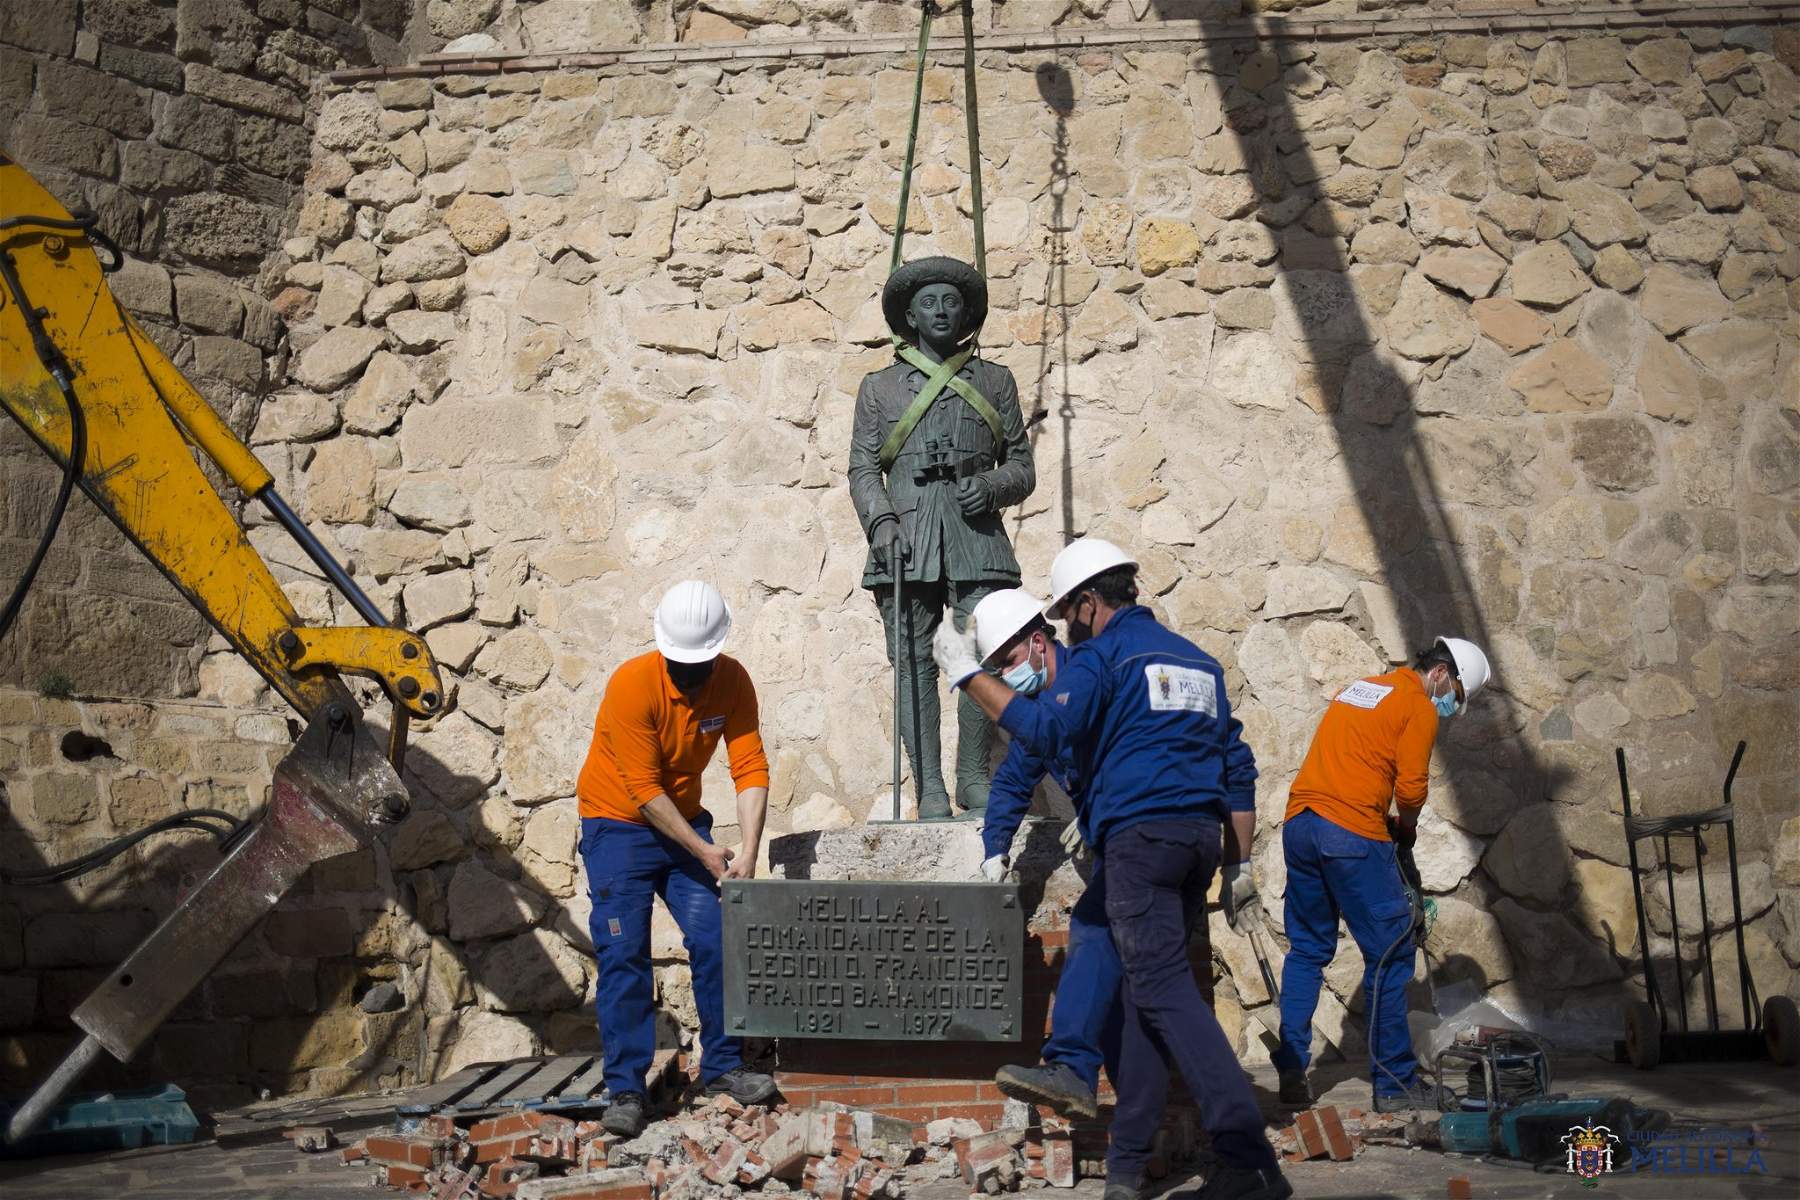 Spain, historic event: last standing monument to Francisco Franco removed